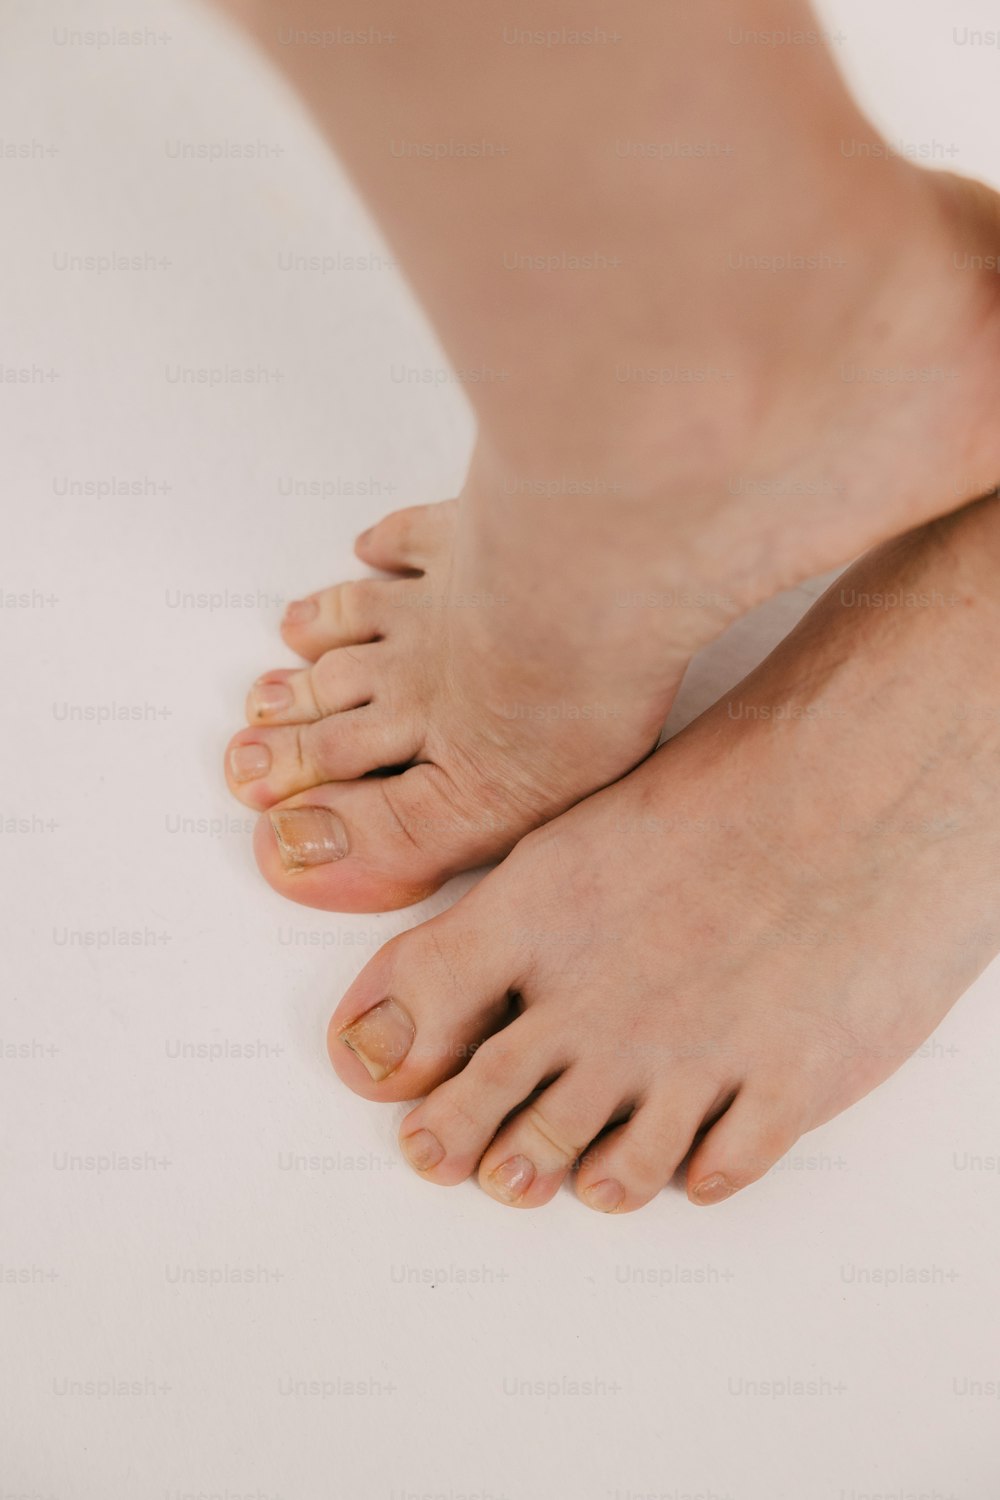 a close up of a person's bare feet on a white surface